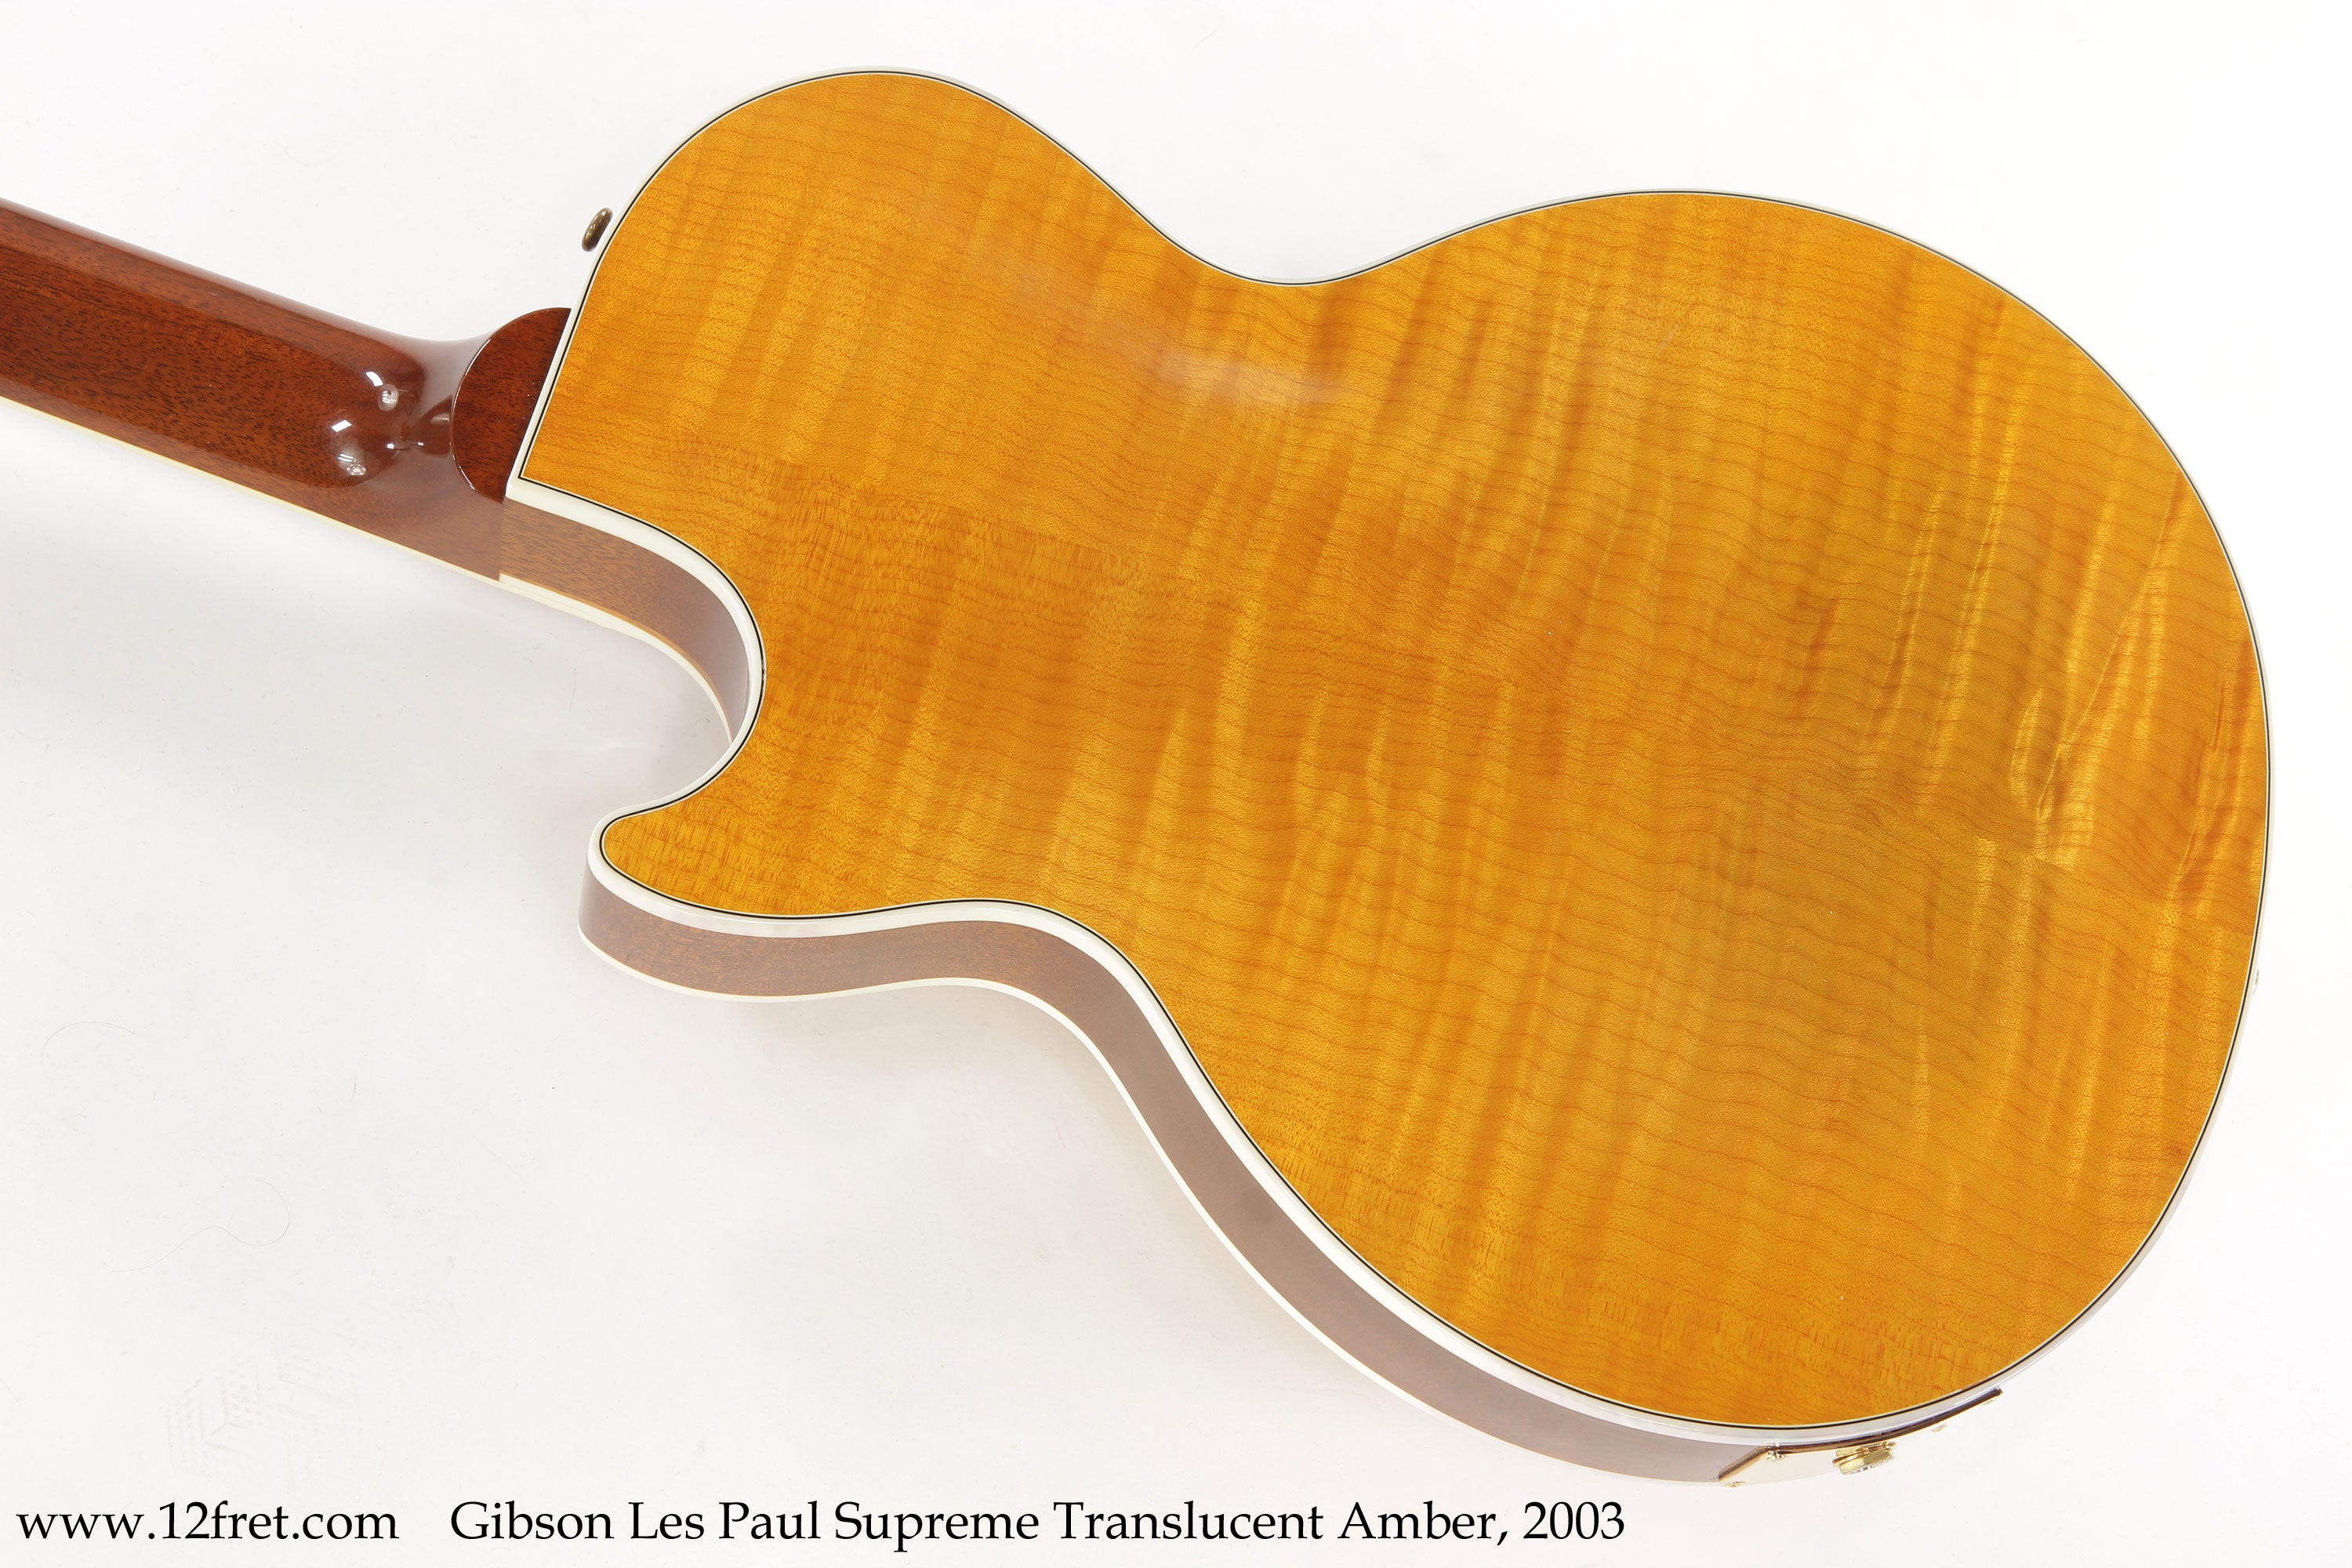 Gibson Les Paul Supreme Translucent Amber, 2003 - The Twelfth Fret